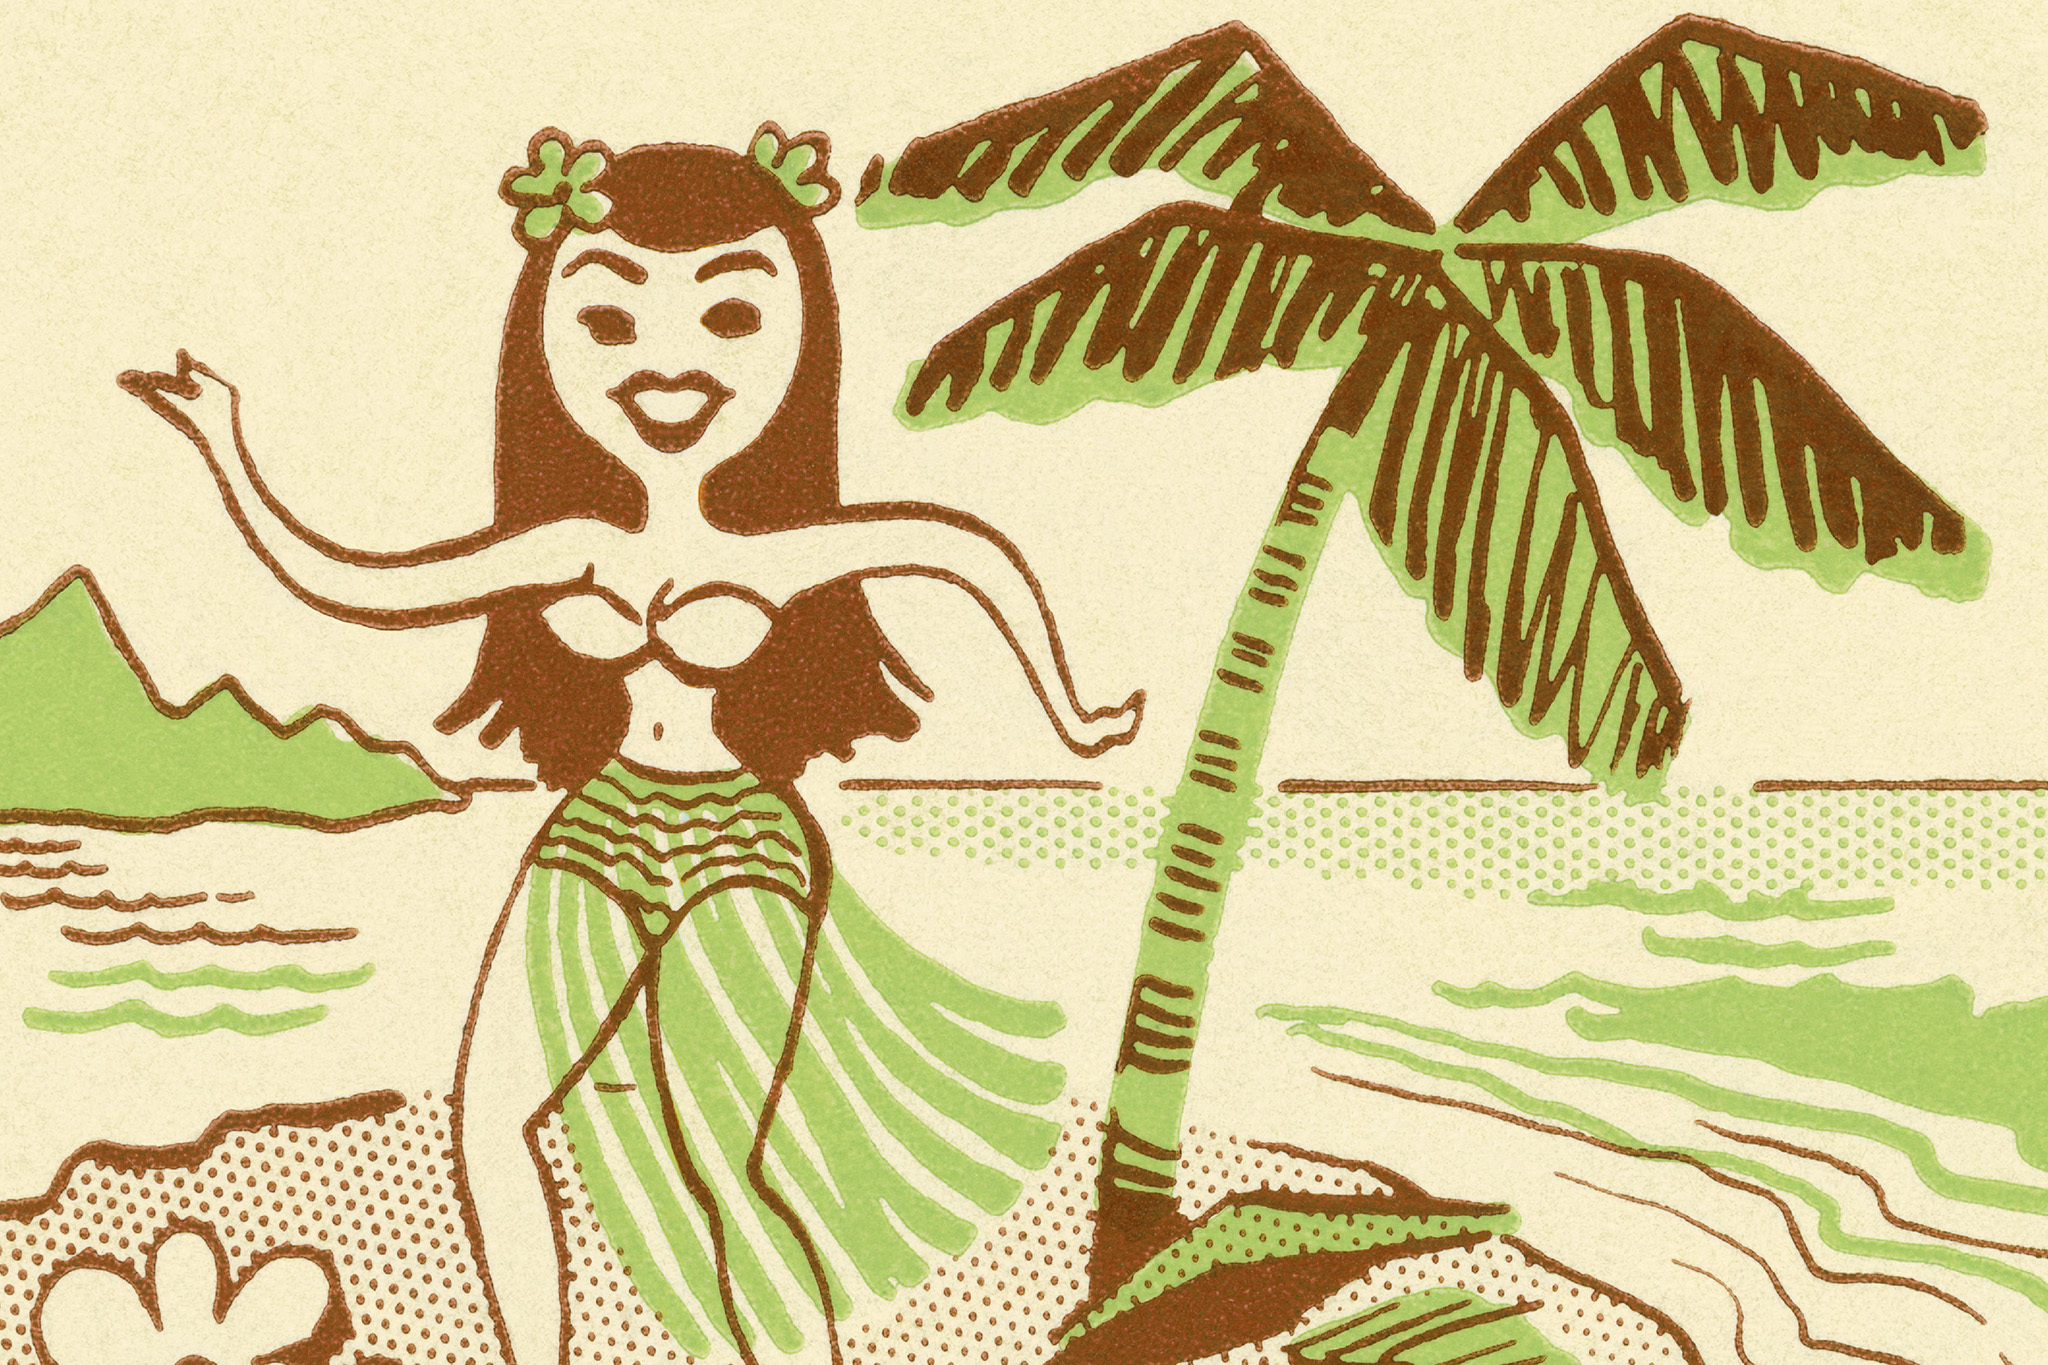 The History And Cultural Significance Of The Hawaiian Coconut Bra - Hawaii  Star